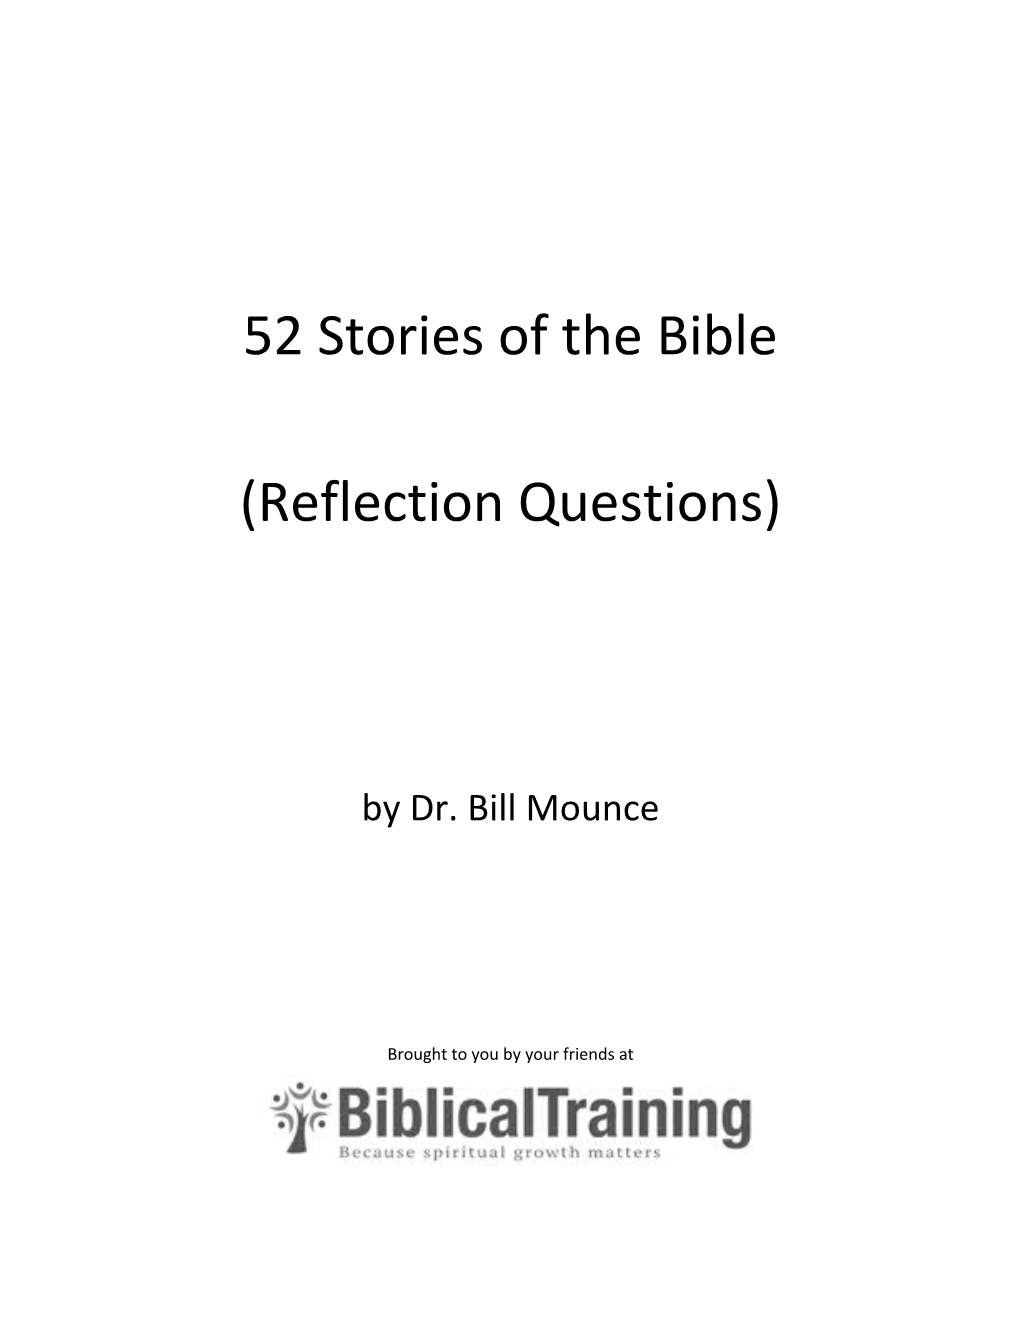 52 Stories of the Bible